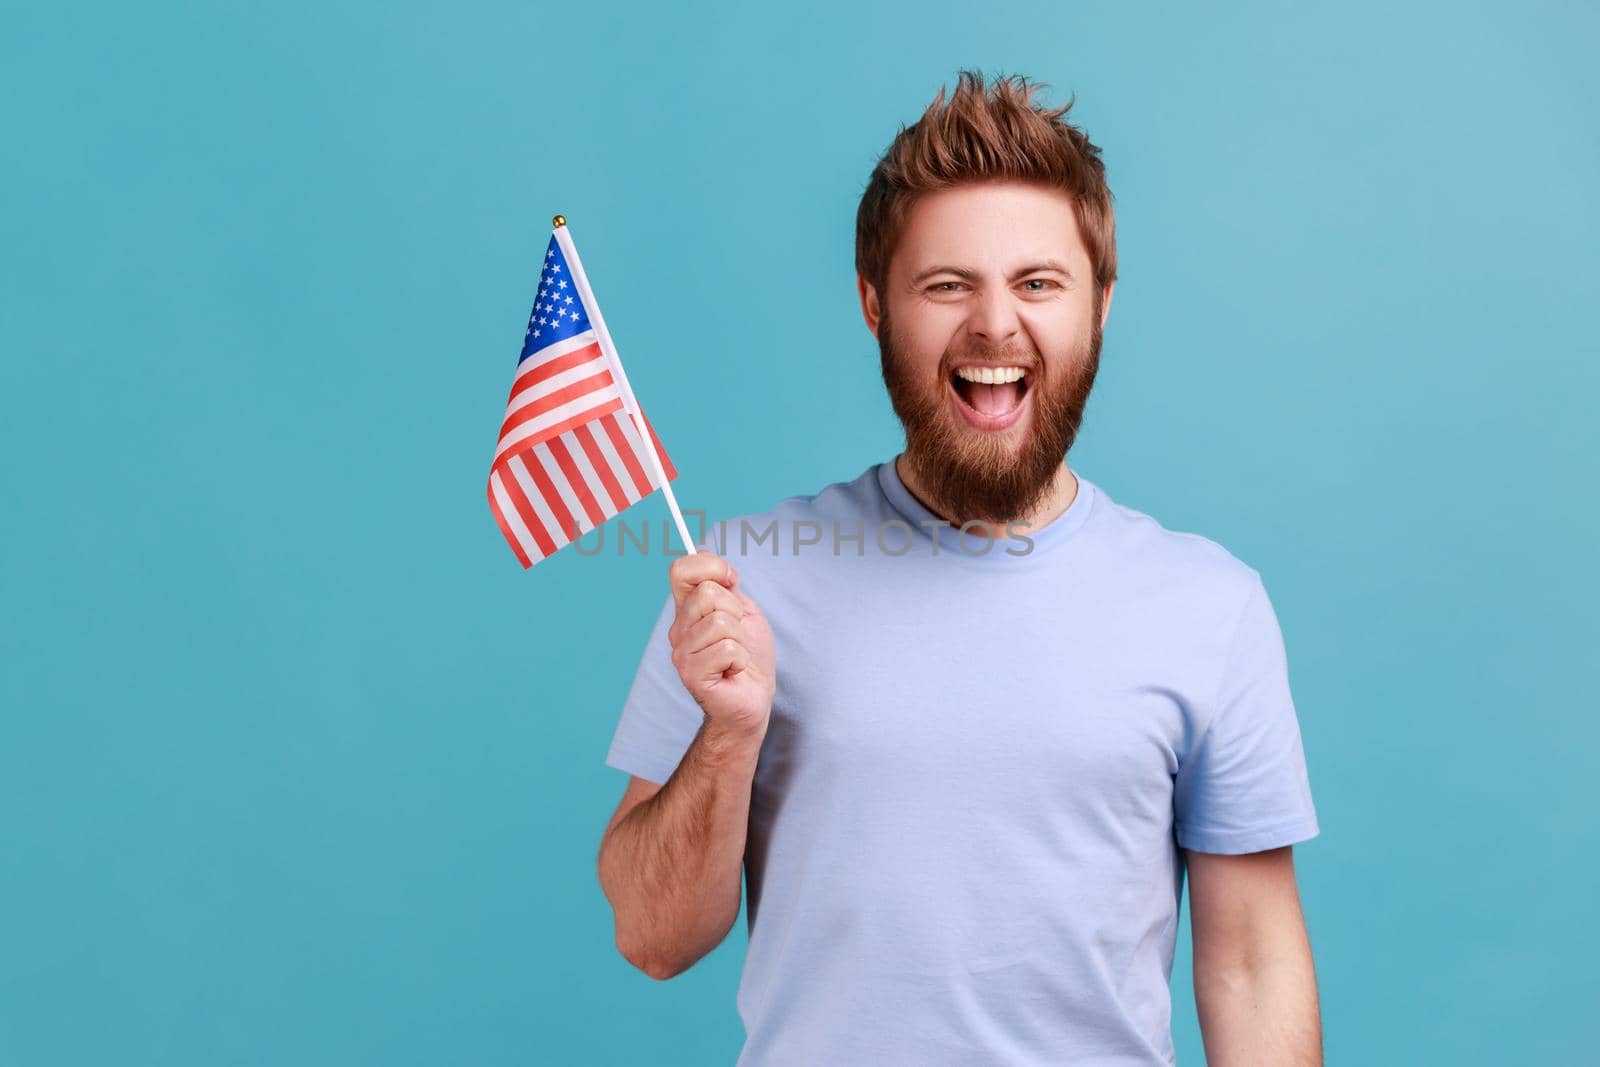 Man holding in hand flag of united states of america celebrating independence day excited expression by Khosro1